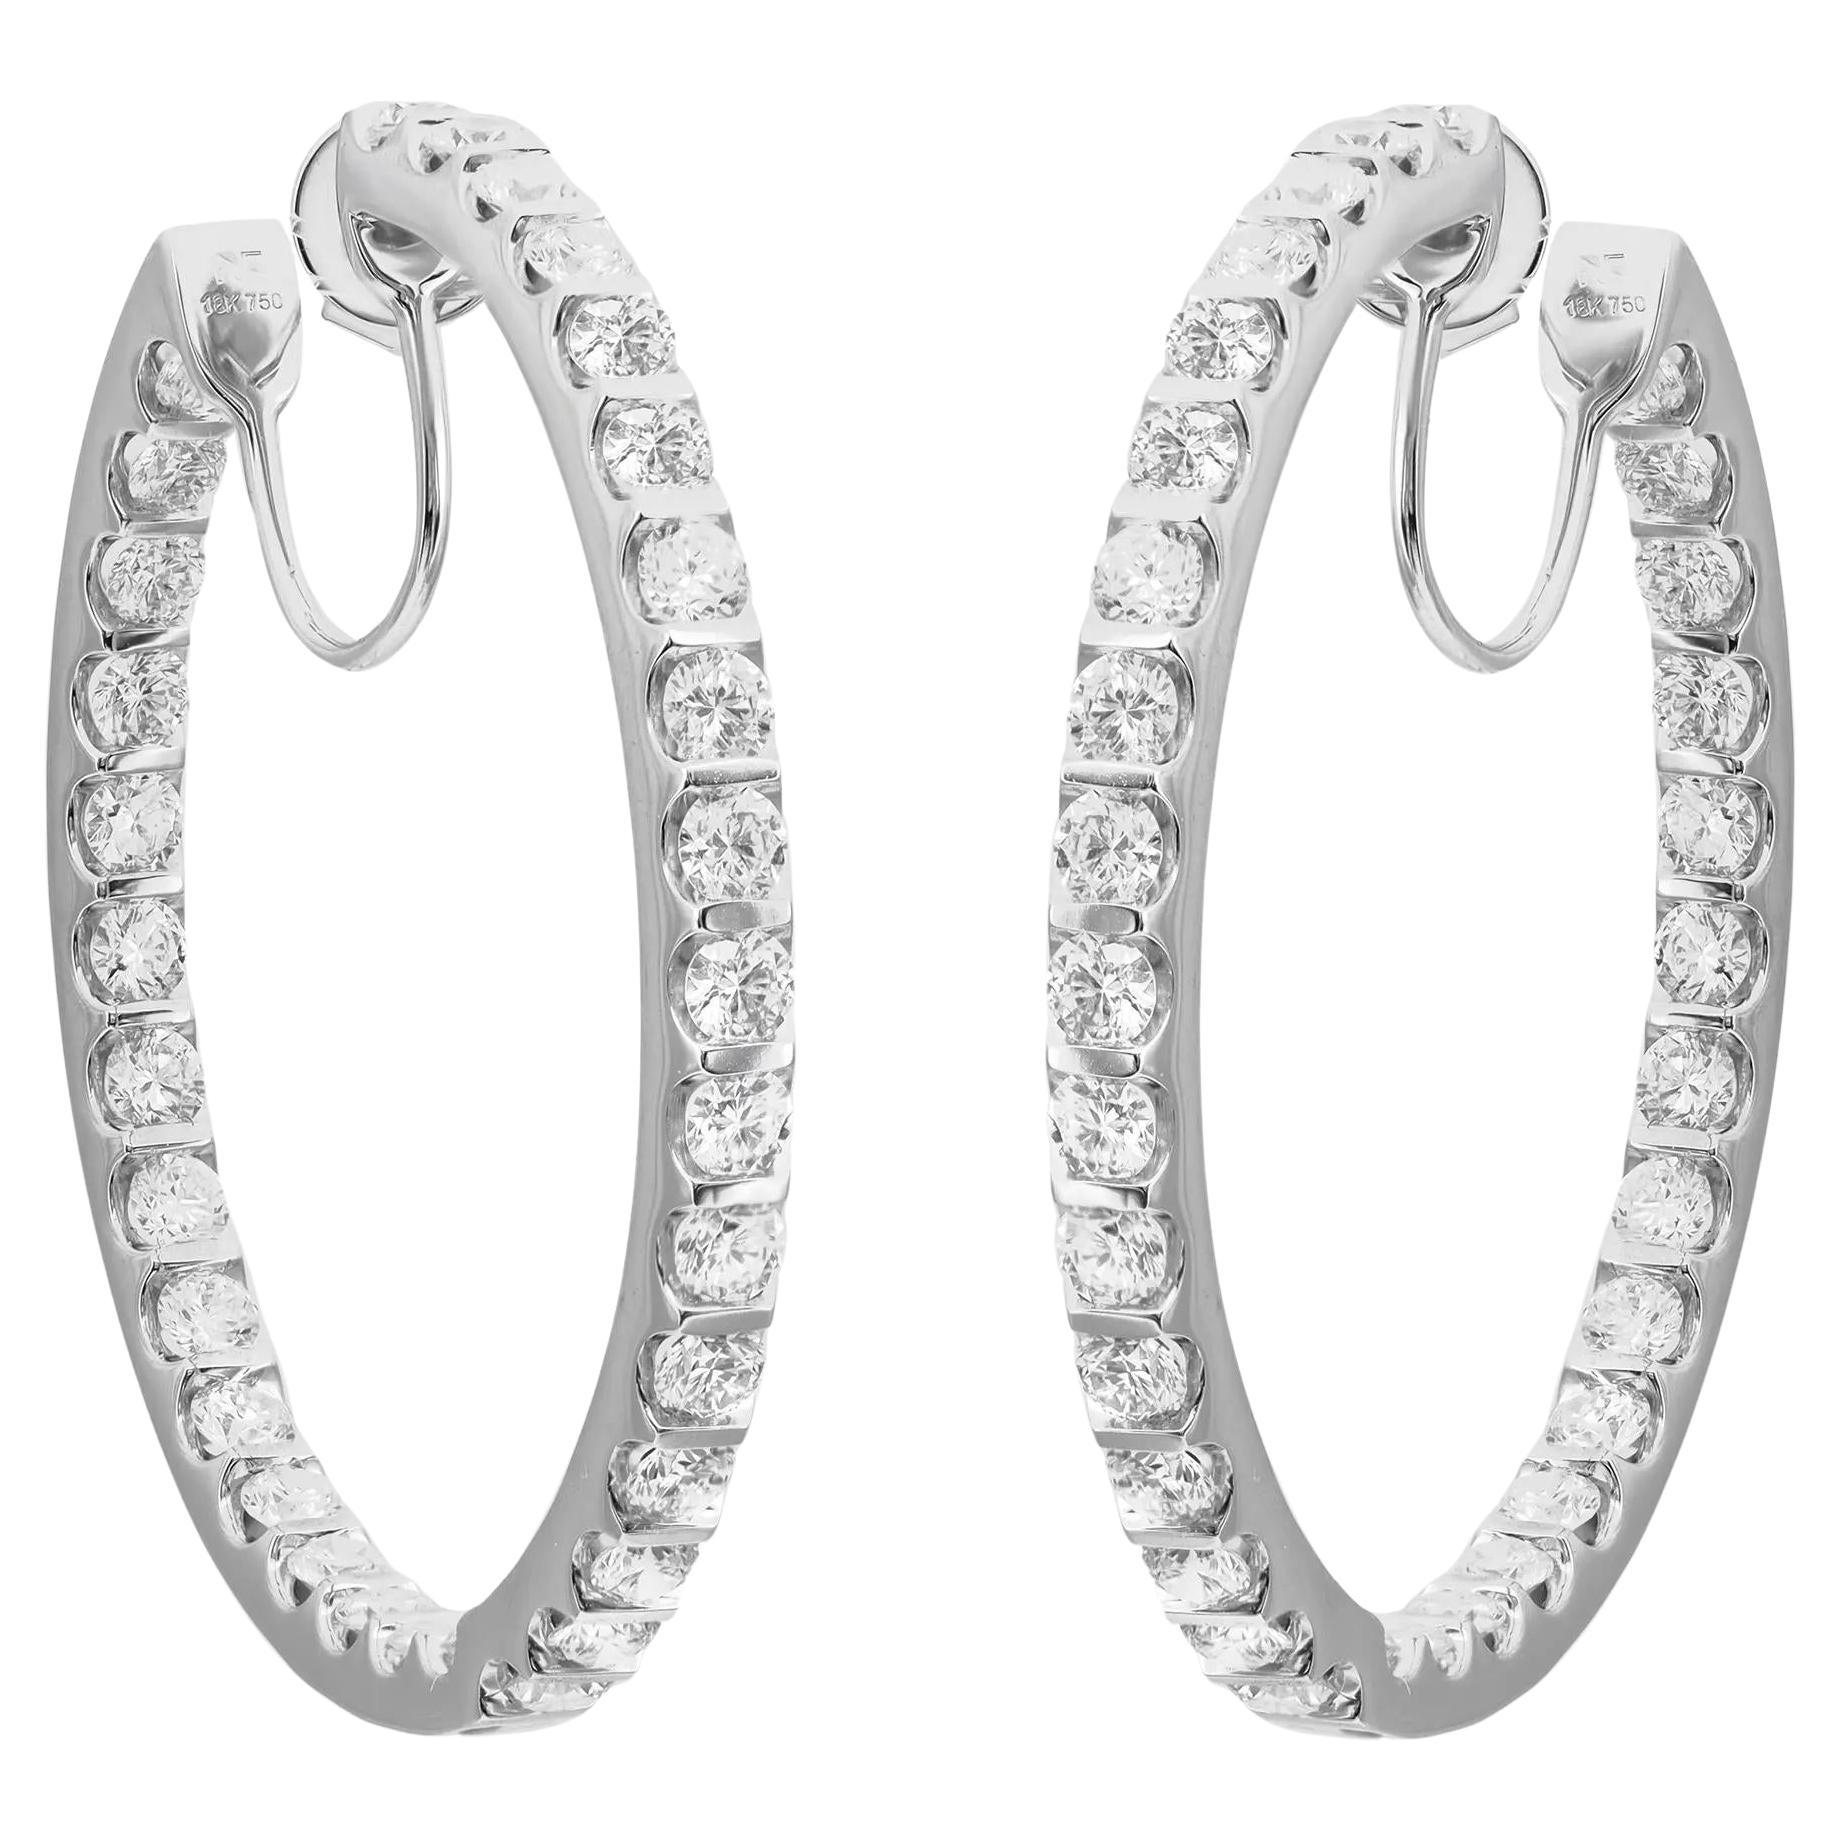 Inside Out Round Cut Diamond Hoop Earrings 18K White Gold 4.76Cttw 1.5 Inches